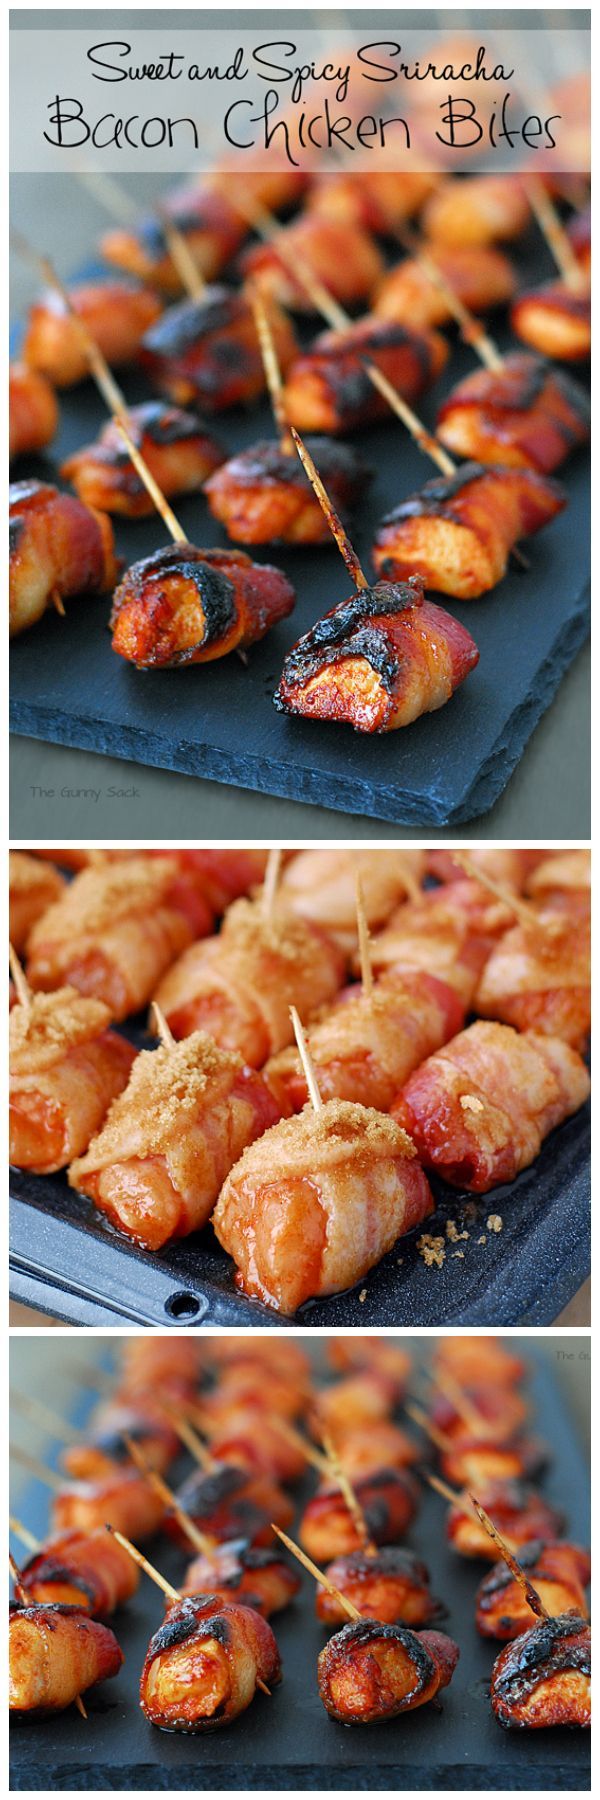 This is the time of the year when everyone is looking for awesome appetizer recipes. These Sweet and Spicy